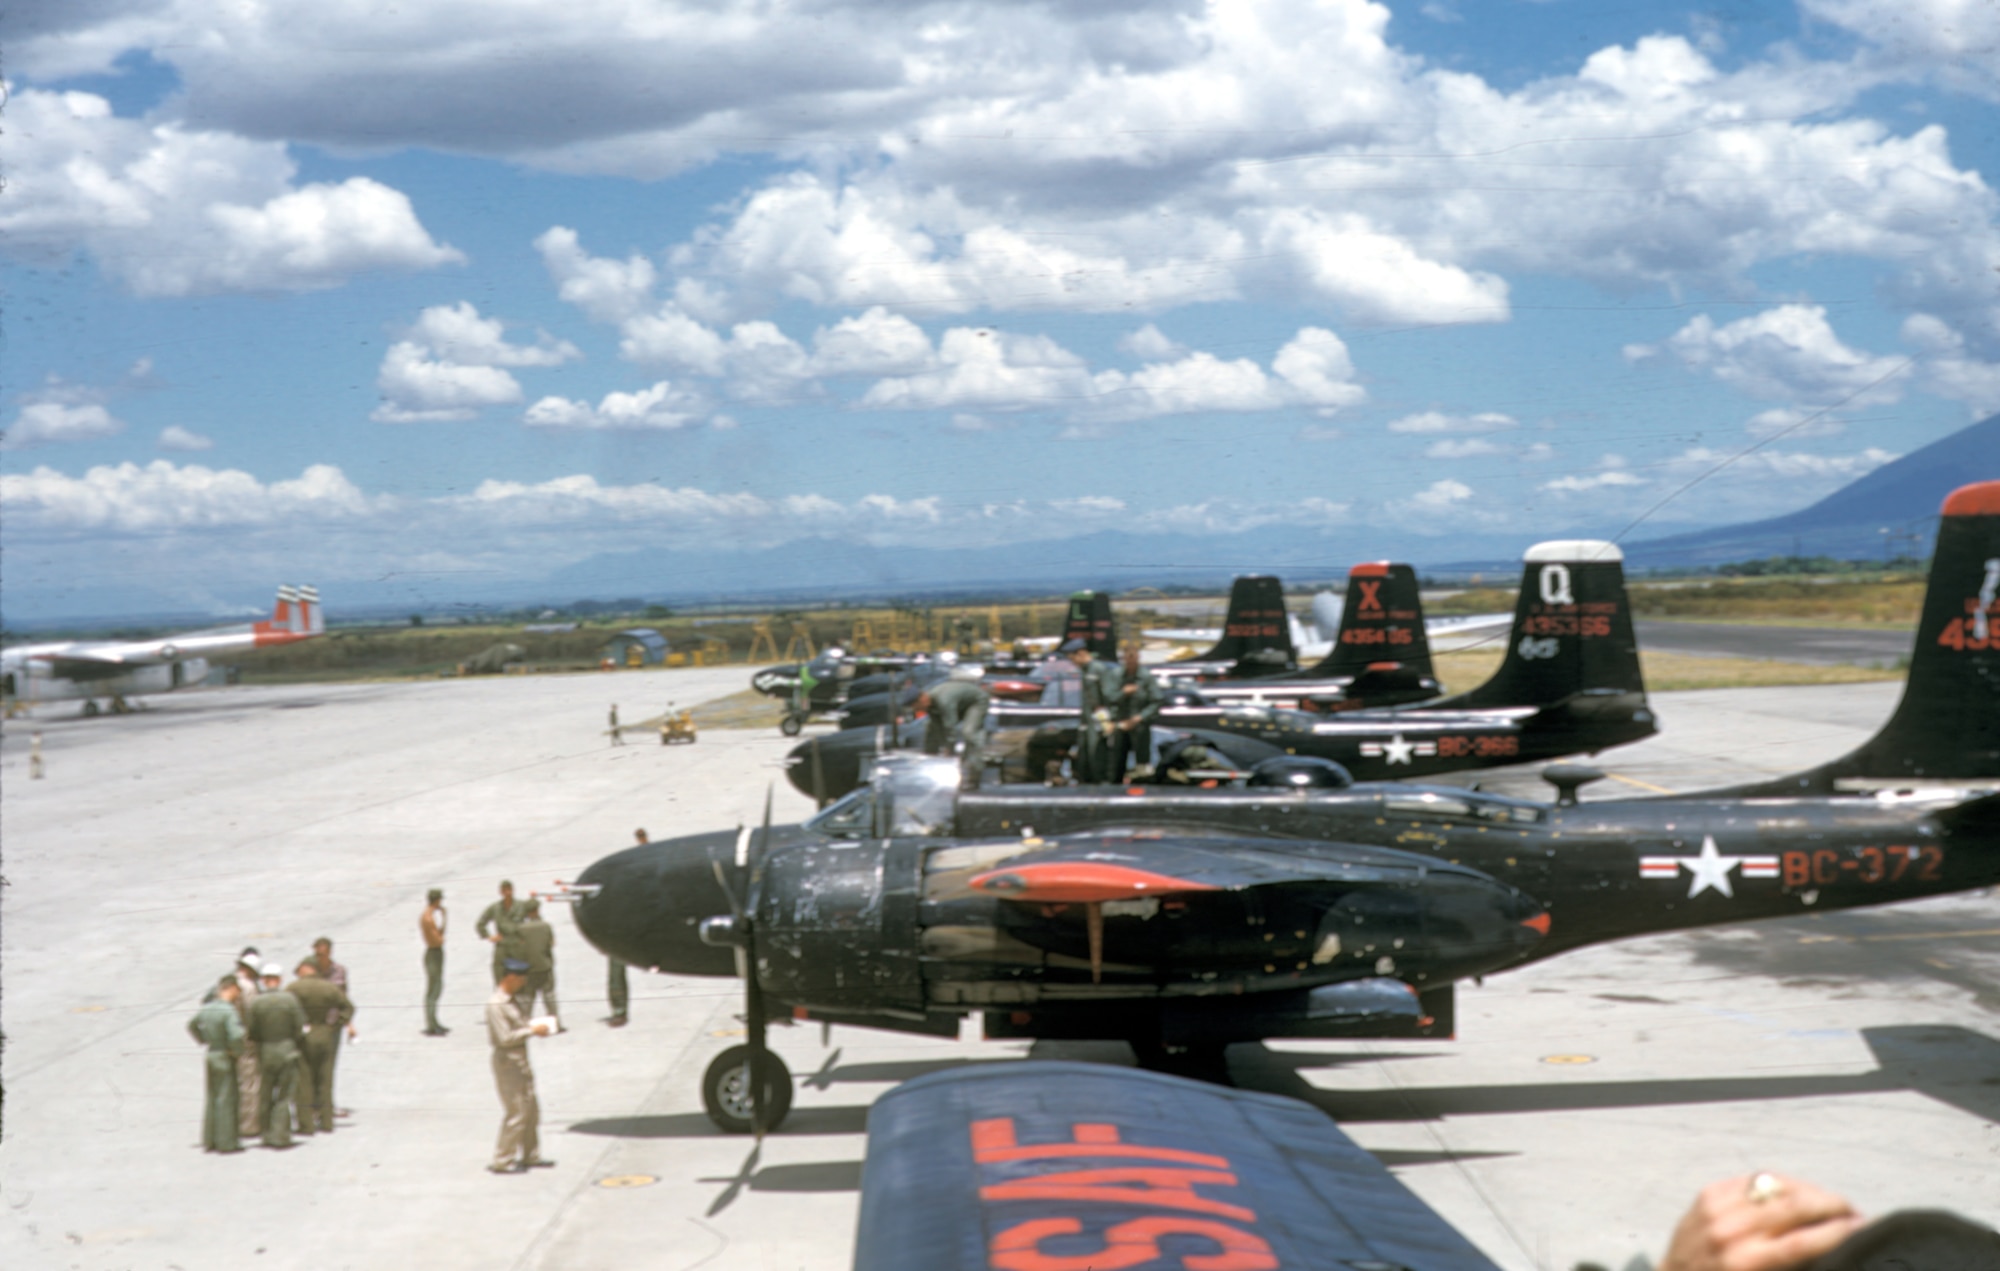 From 1950-1954, the USAF loaned transport and attack aircraft to the French air force in Indochina. The USAF also sent about 200 aircraft mechanics to help maintain them. The B-26s are in transit in the Philippines. (U.S. Air Force photo)